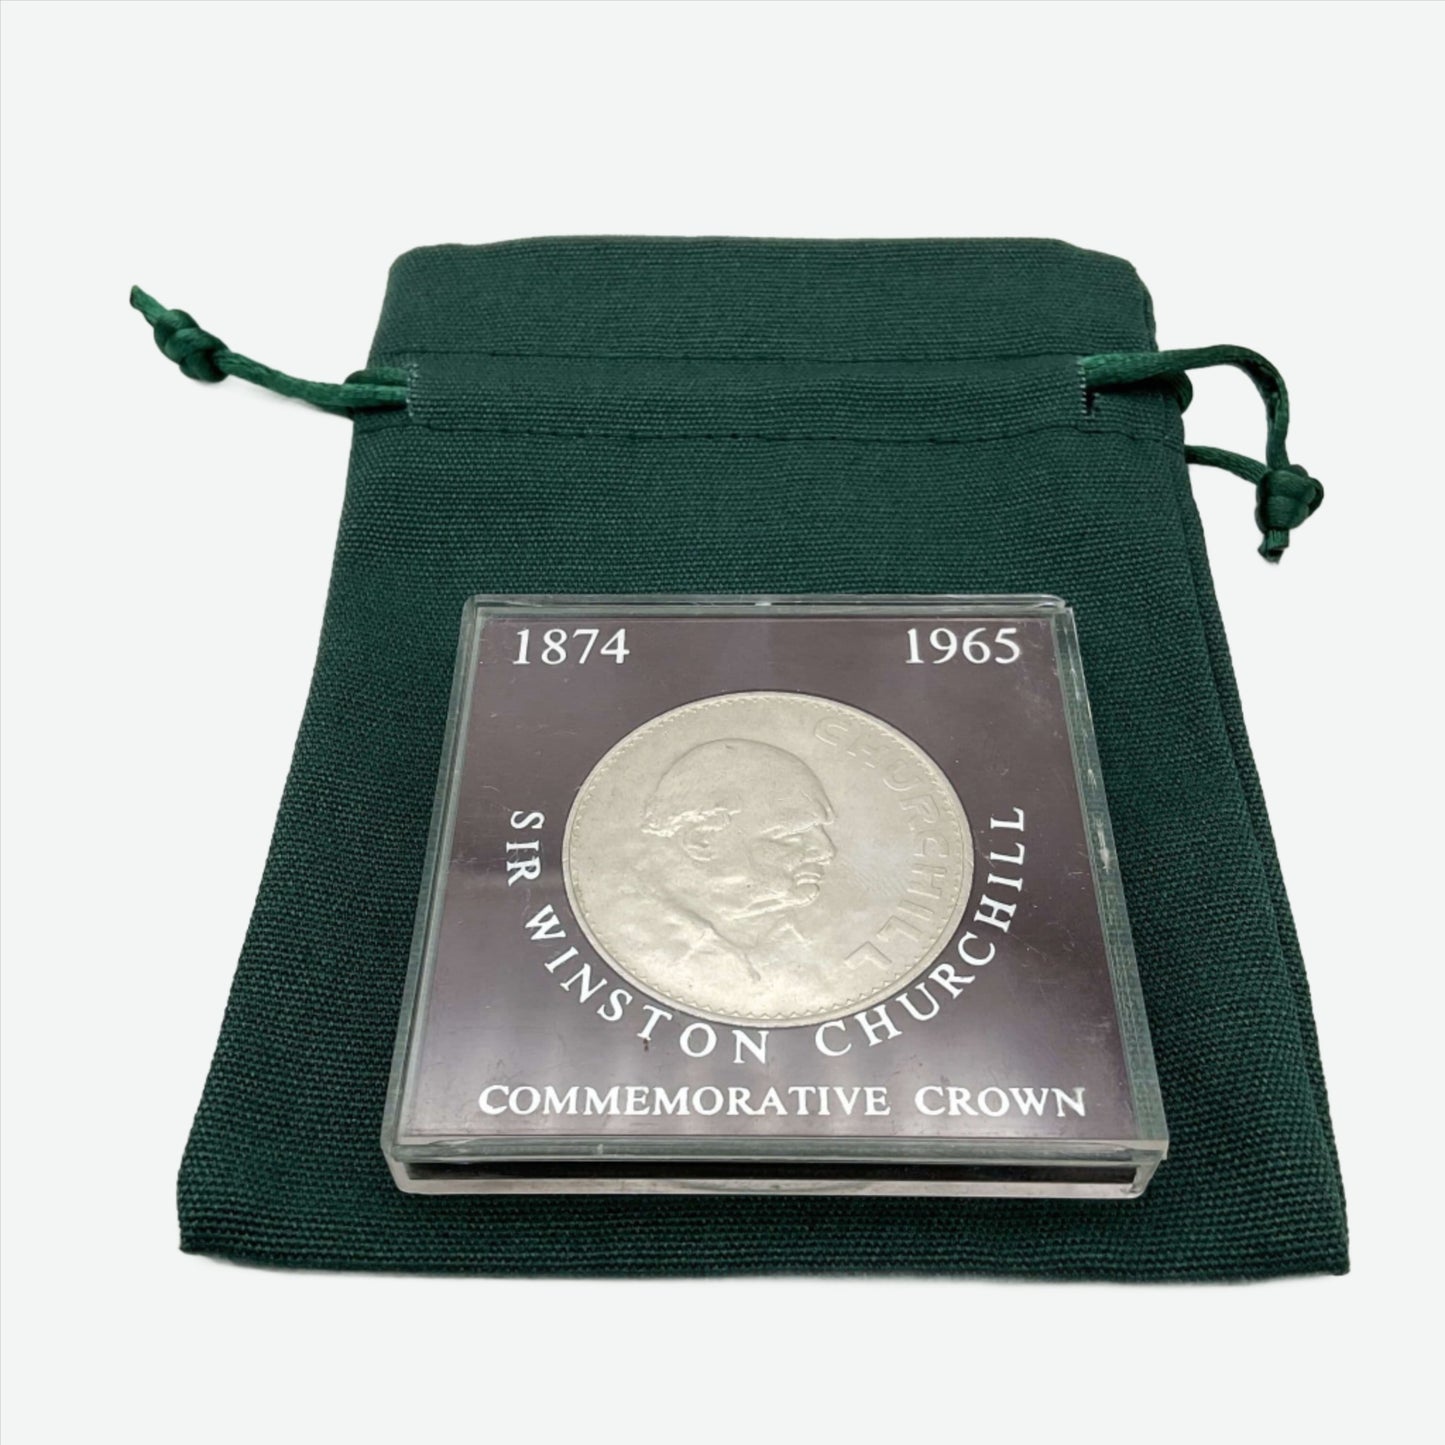 1965 Winston Churchill Commemorative Crown on a green gift bag